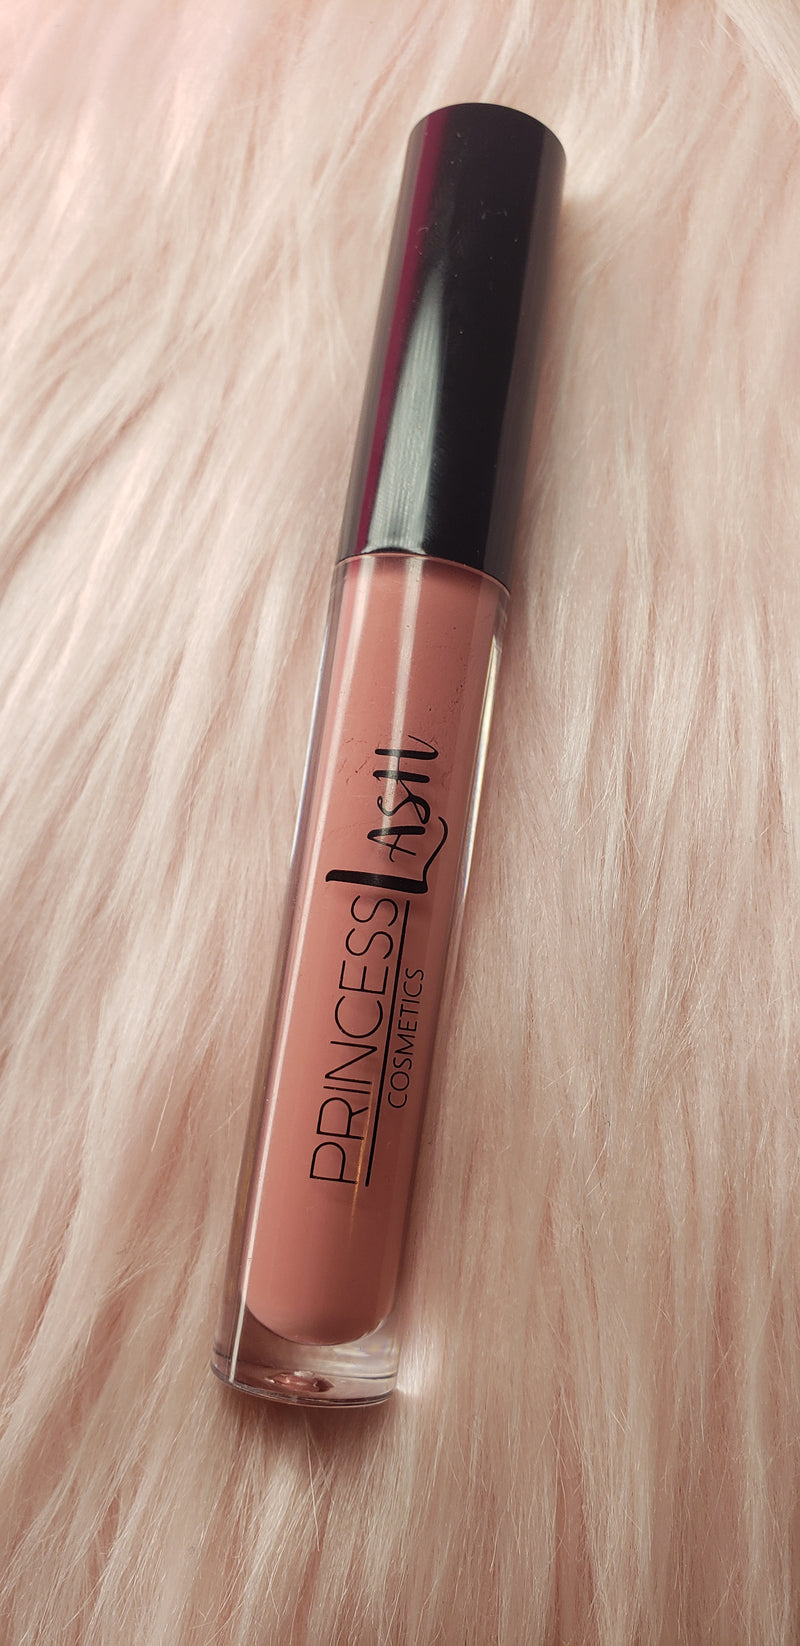 Boss Nude lip gloss from Princess Lash, LLC. A black owned cosmetic line